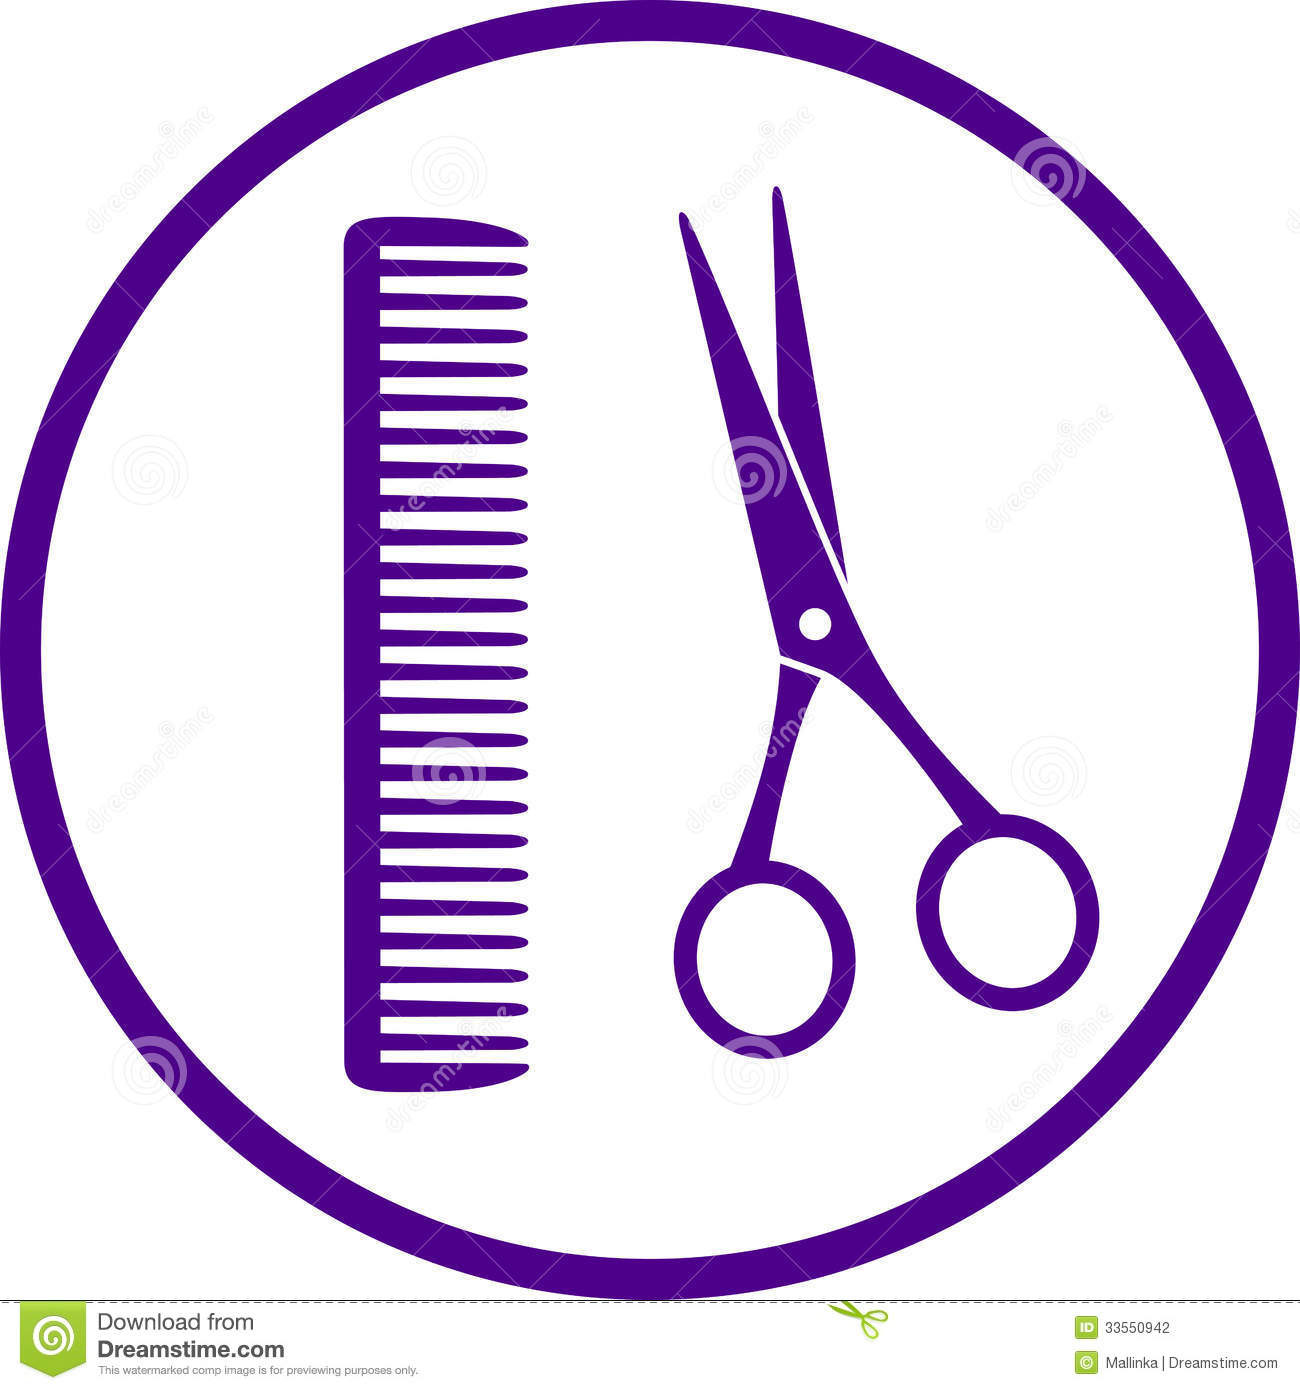 Sign With Scissors And Comb On White Background Mr No Pr No 2 932 2